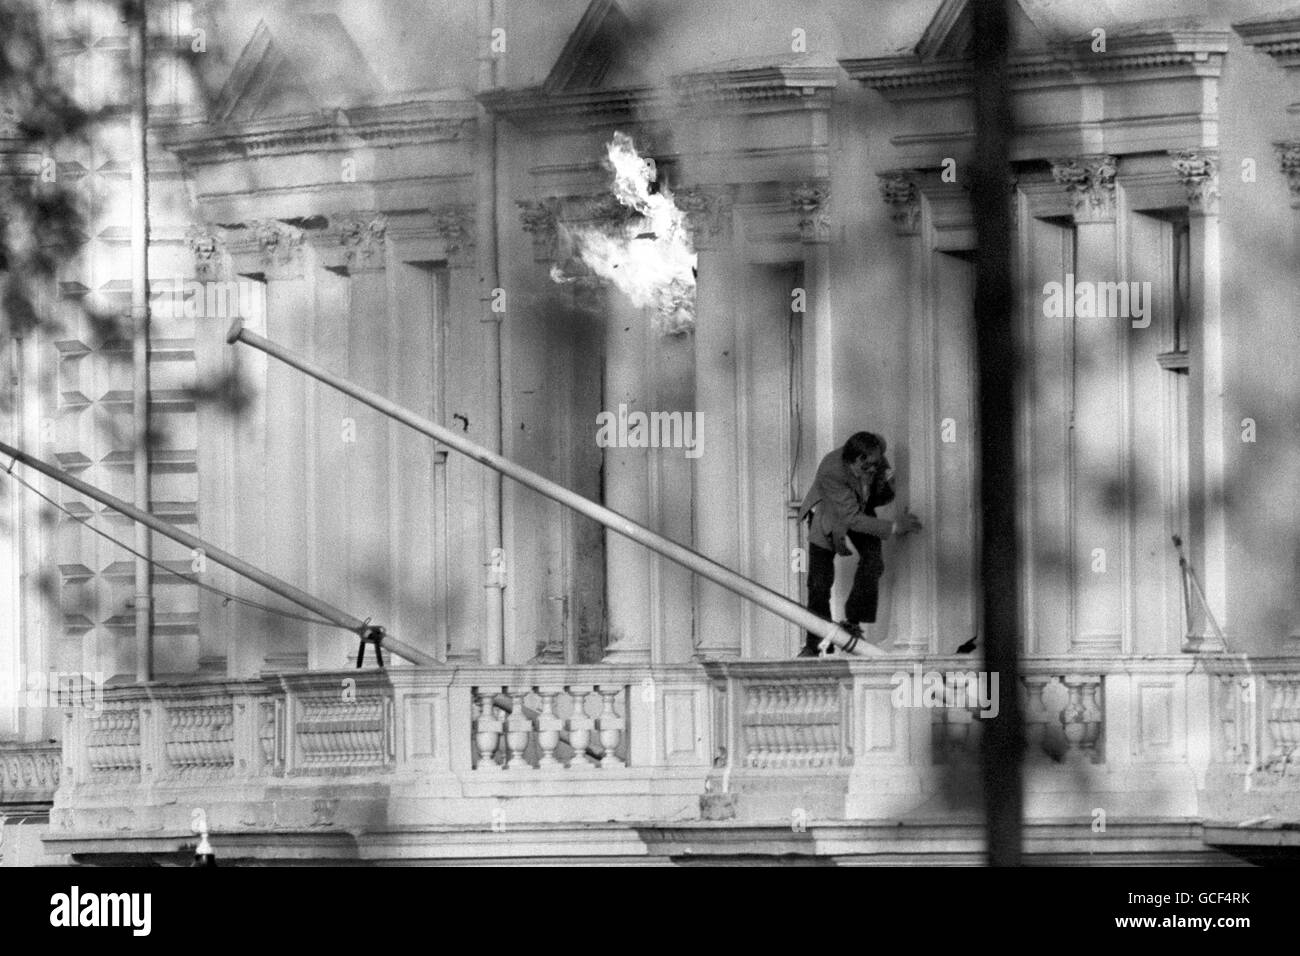 BBC sound recordist Sim Harris, one of the British hostages, scramble to safety as flames billow from the window at the Iranian Embassy in London when two explosions ended the six day siege at the building in Princes Gate. Fourteen hostages were brought out alive and a number of gunmen were detained. Stock Photo